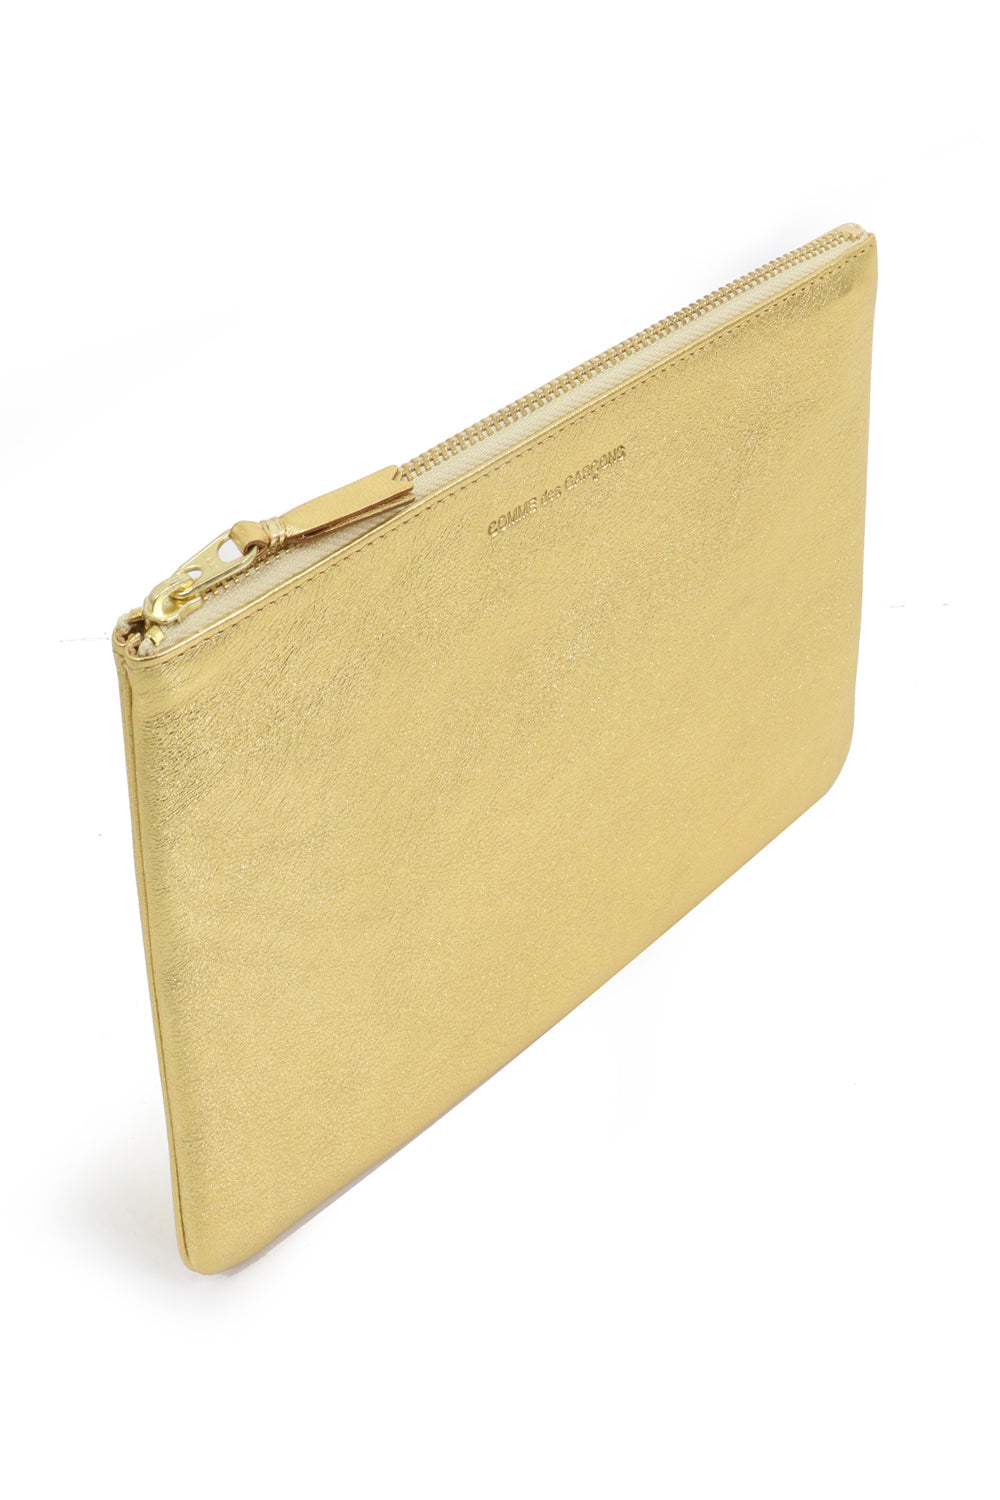 COMME DES GARCONS BAGS GOLD CLASSIC LEATHER POUCH GOLD